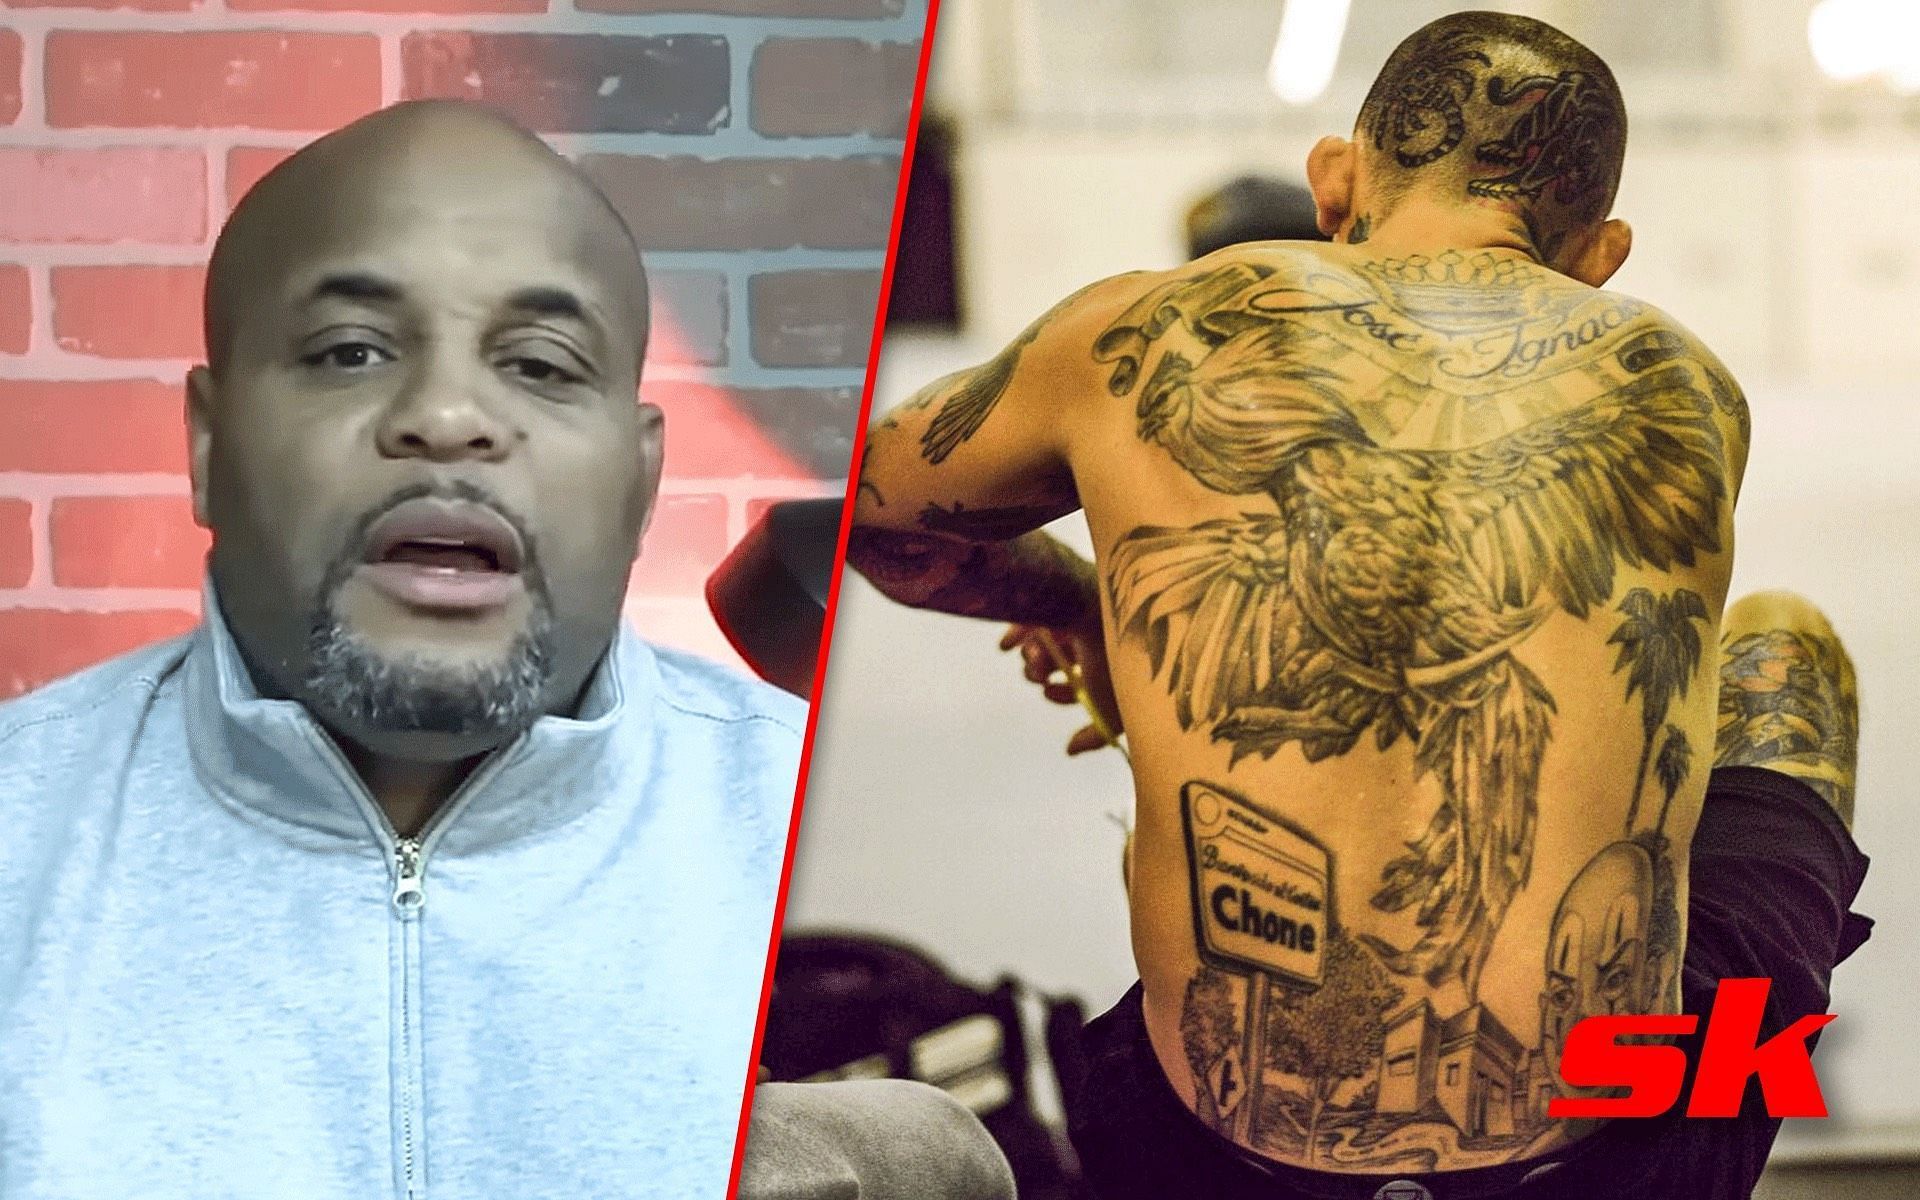 Henry Cejudo reacts to potential rival Marlon Chito Vera getting a head  tattoo